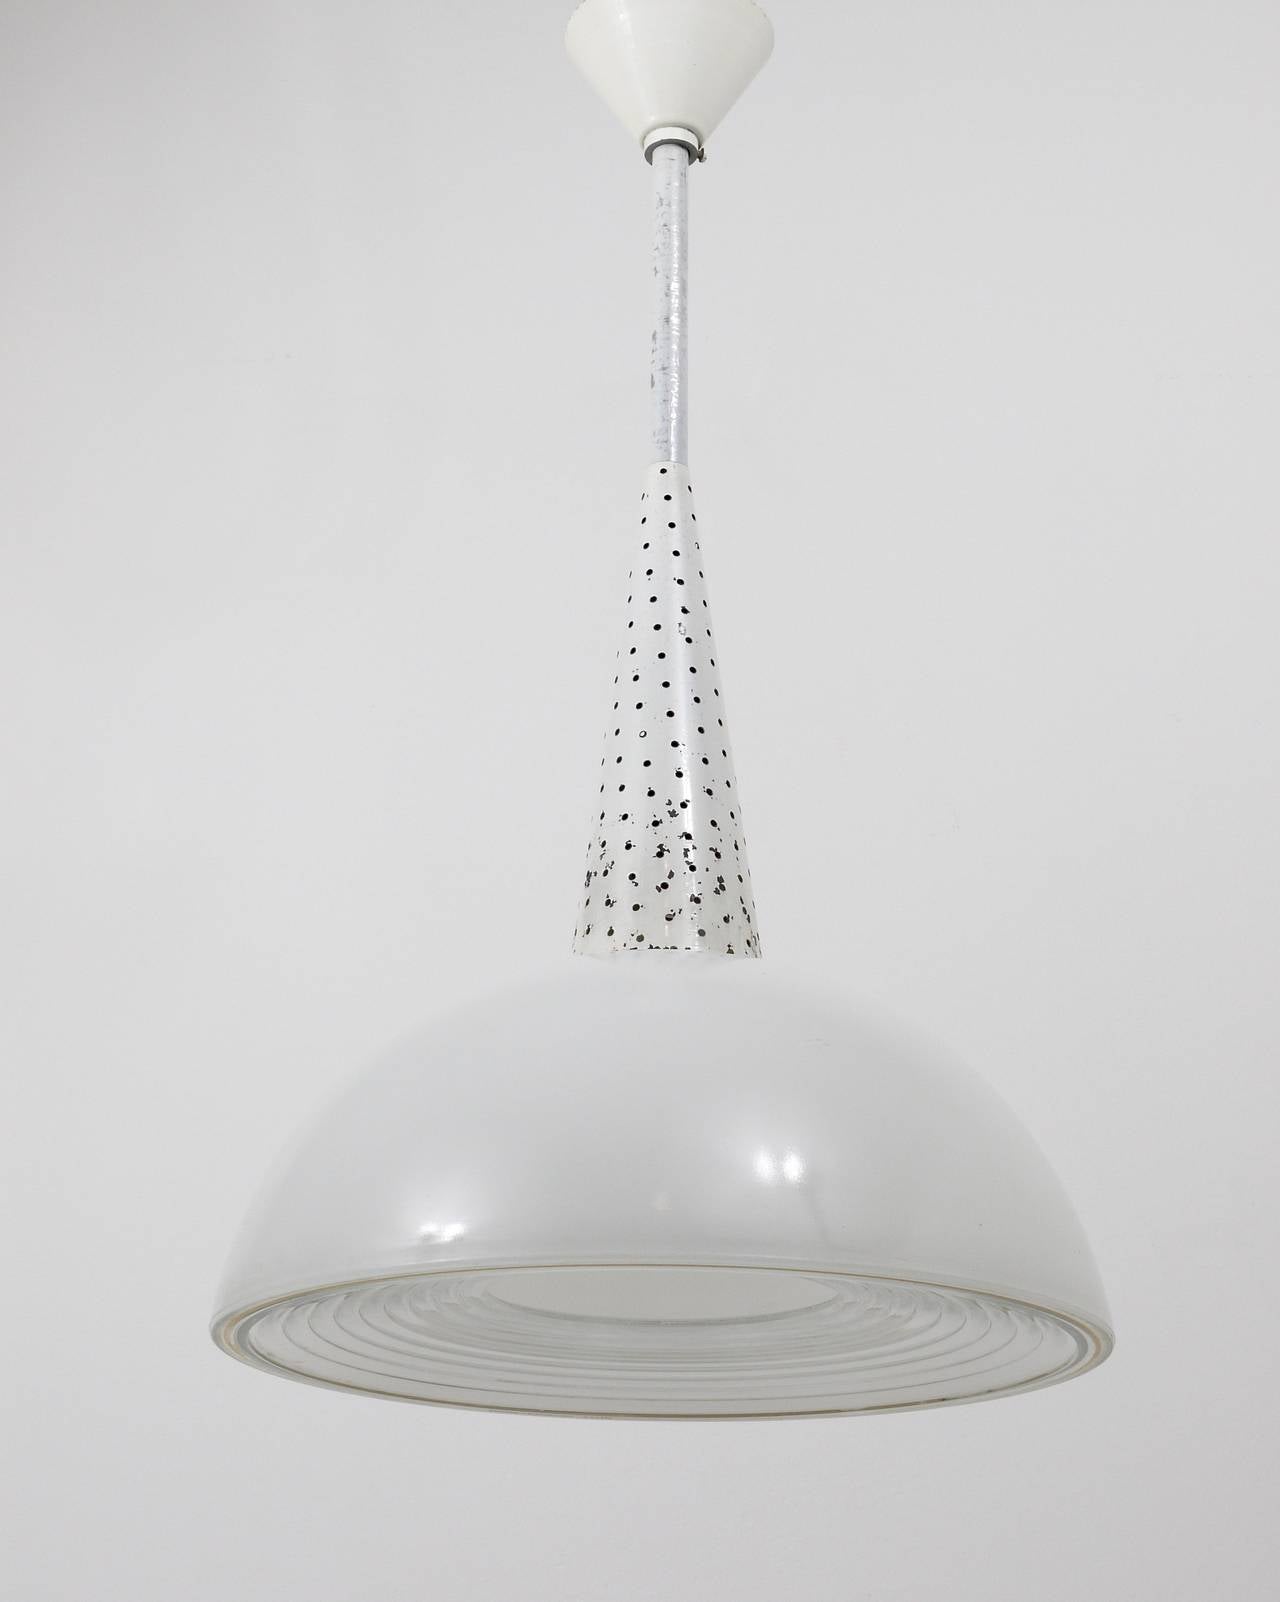 A beautiful industrial midcentury pendant lamp from the late 1940s / early 1950s, attributed to Mathieu Mategot for Holophane.  Made of white painted, perforated metal. It has a beautiful hemispherical lampshade with its original two-part prismatic